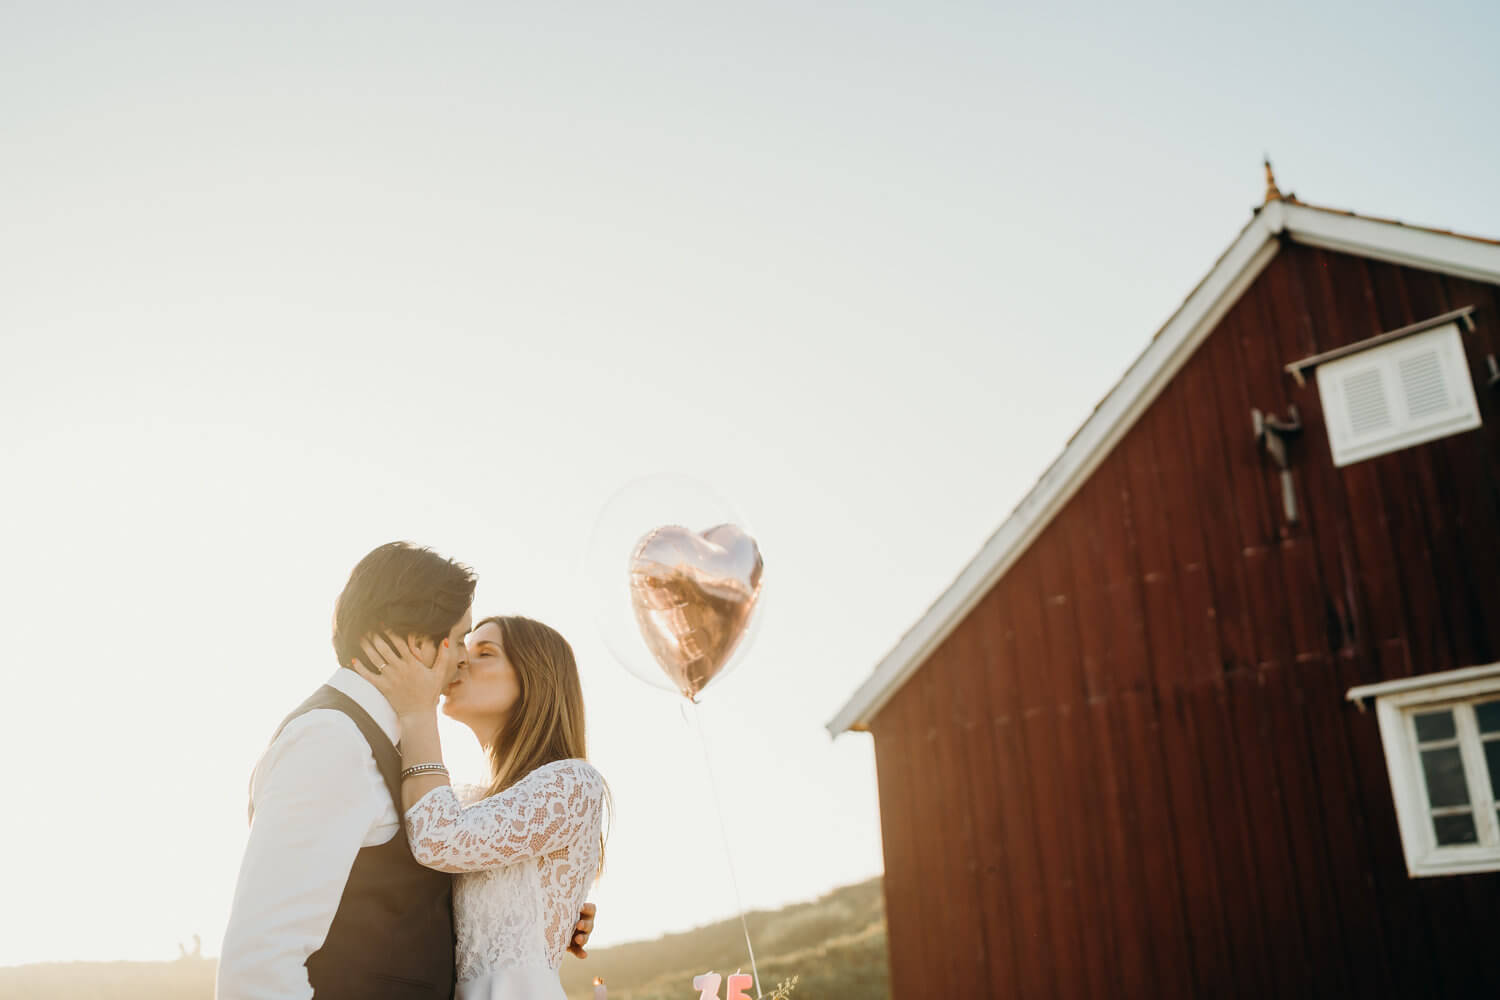 Elopement in Portugal